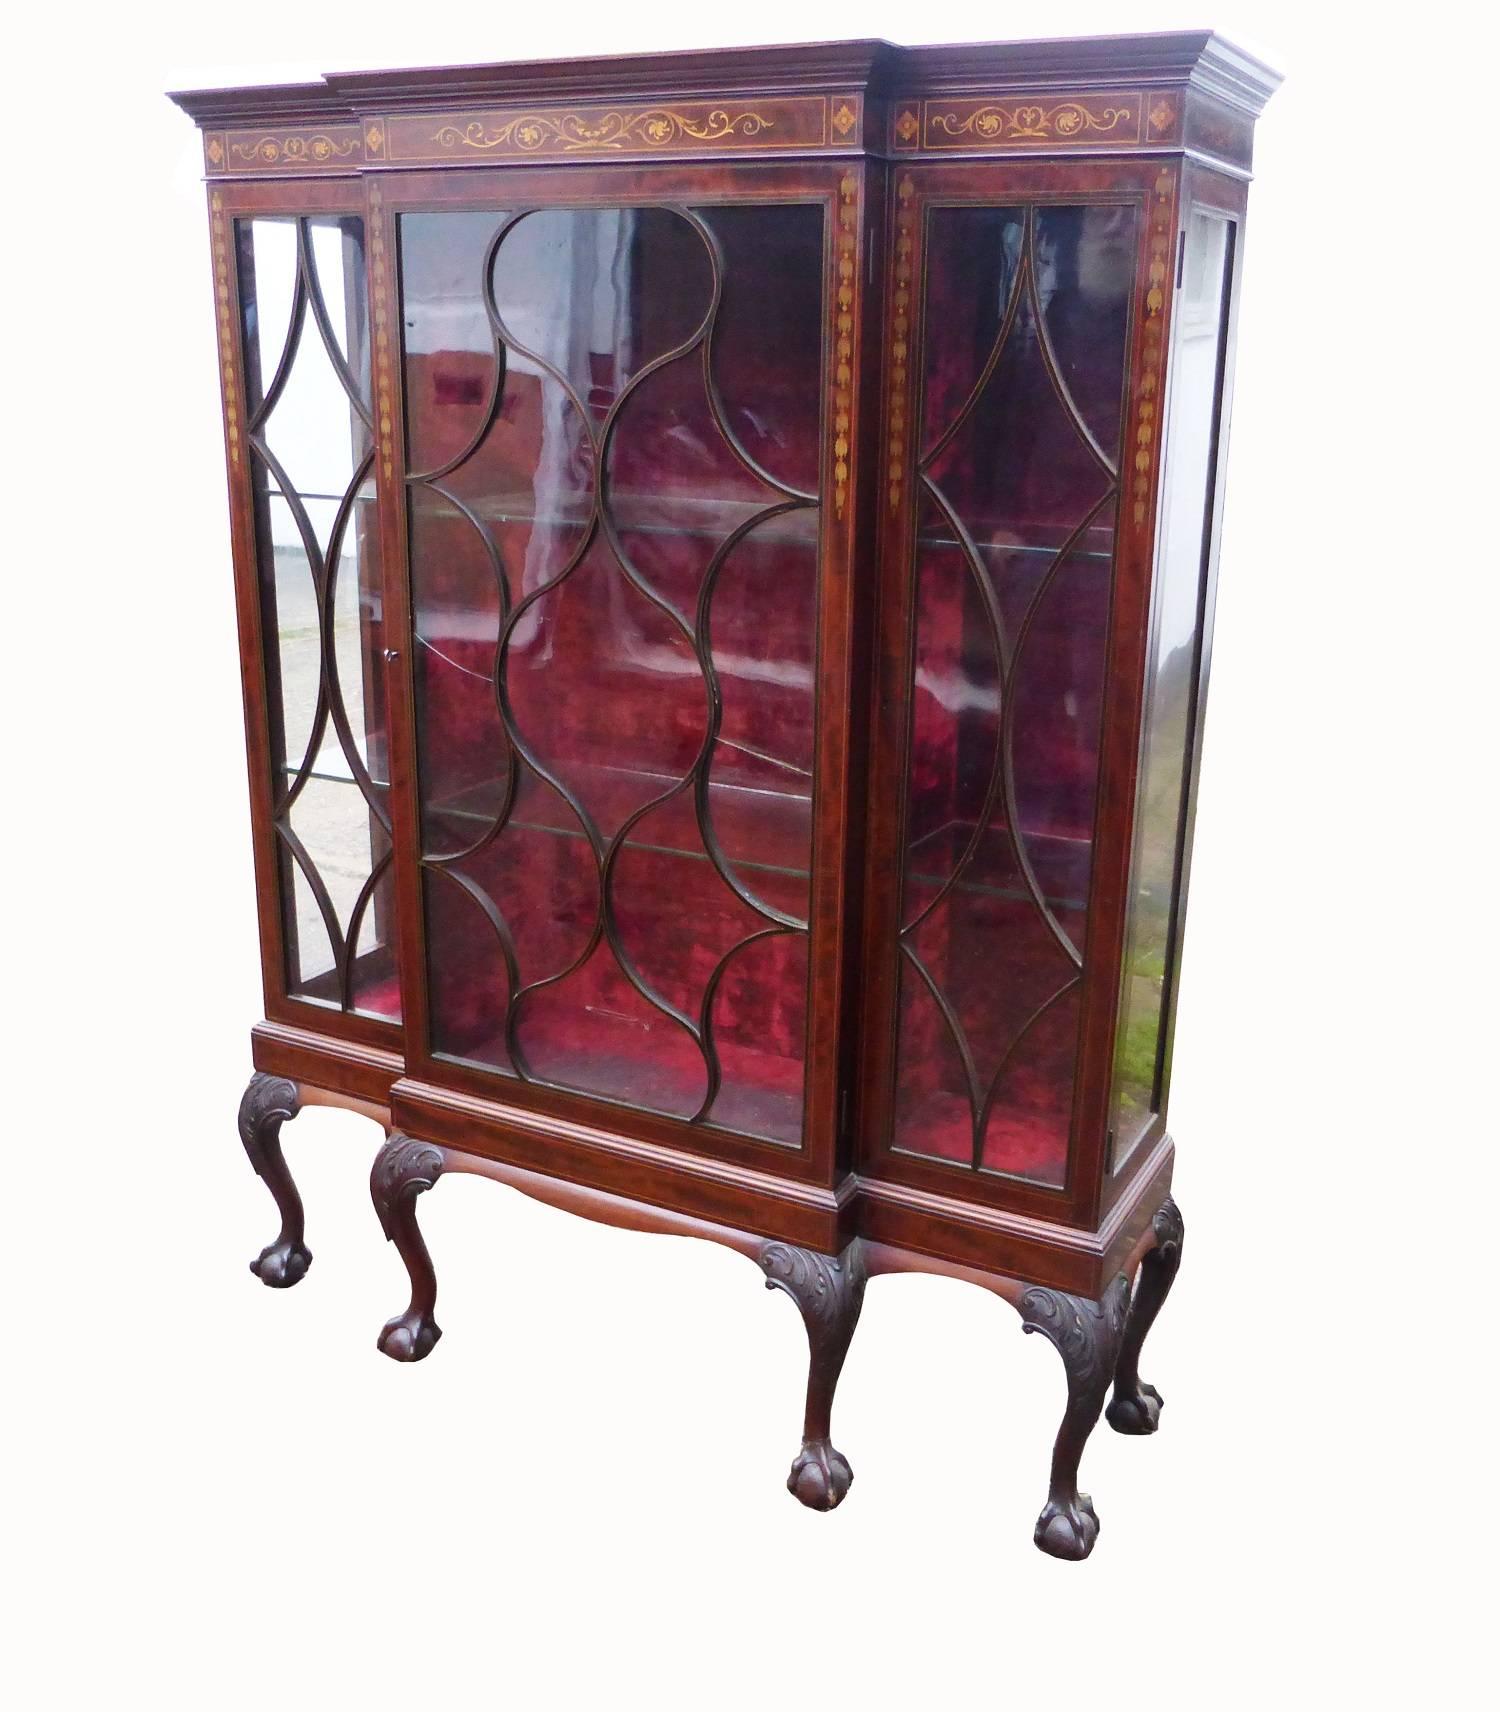 For sale is a very good quality Victorian inlaid display cabinet. The cabinet is nicely inlaid all-over, with elliptical glazed doors and sides. The interior of the cabinet is nicely lined with a velvet type material and houses two glass shelves.